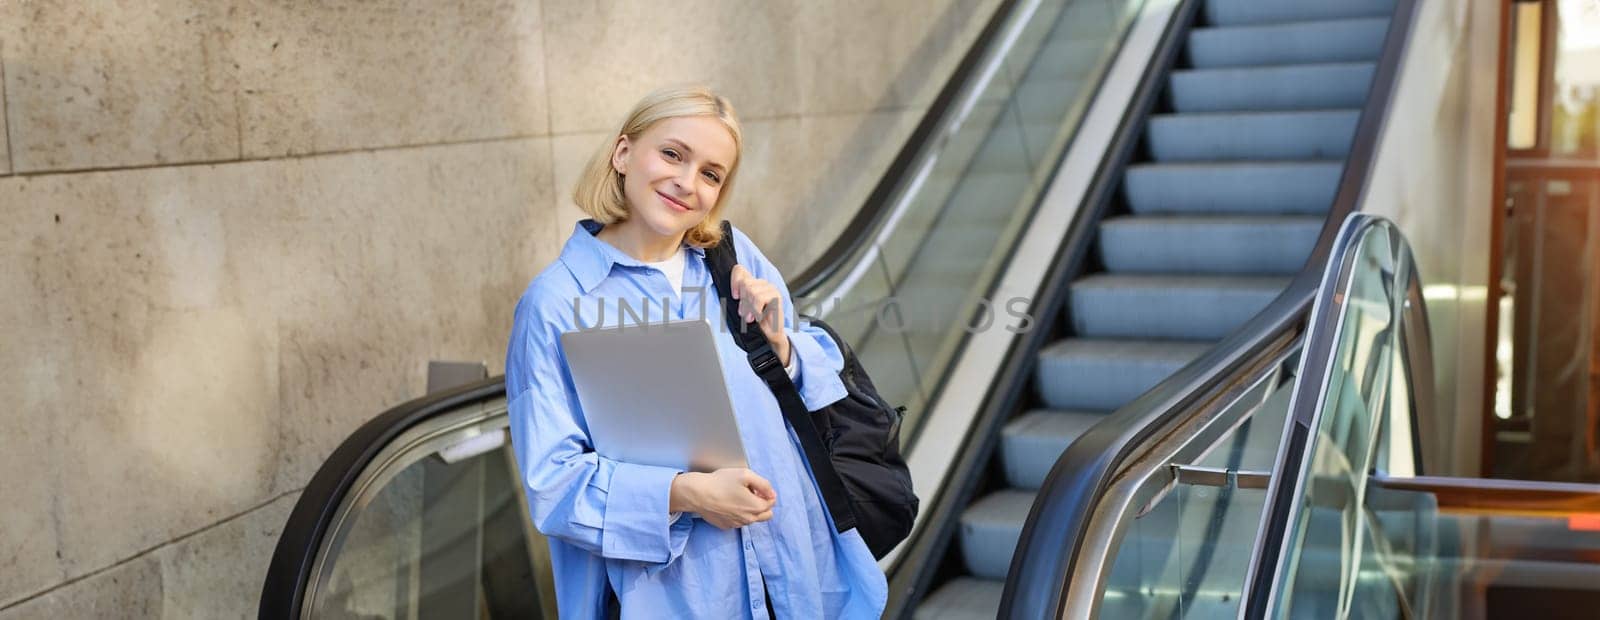 Image of happy, positive young woman in blue shirt, holding laptop and backpack, posing near escalator, tilt her head and smiling at camera.